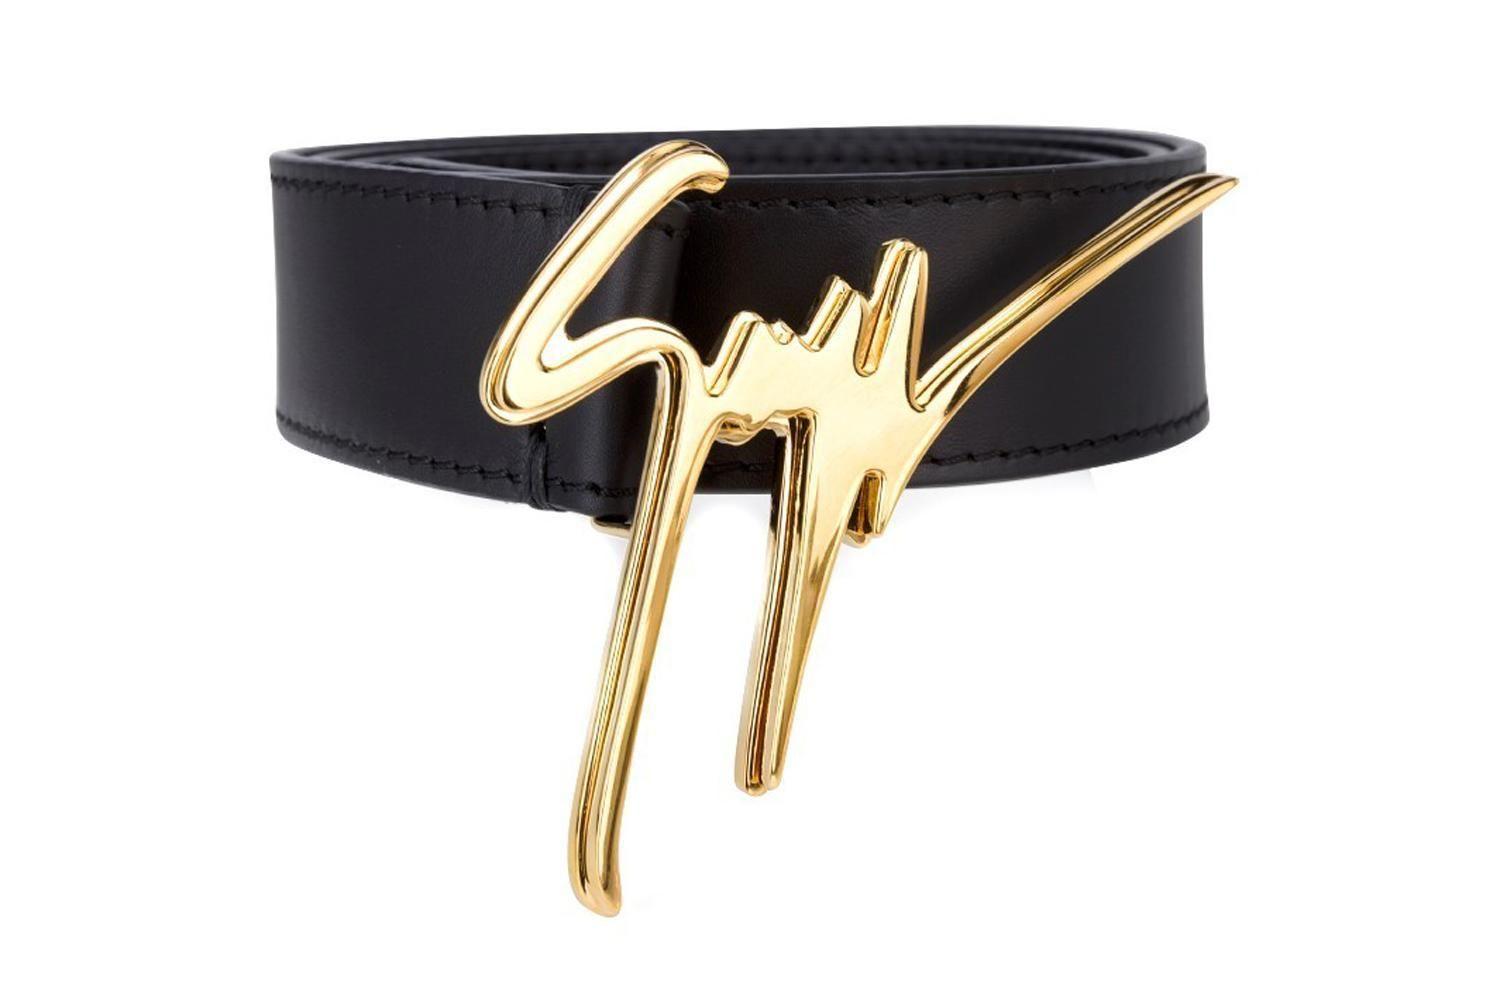 Belt Logo - Our pick of the best designer logo belts with prices from £48